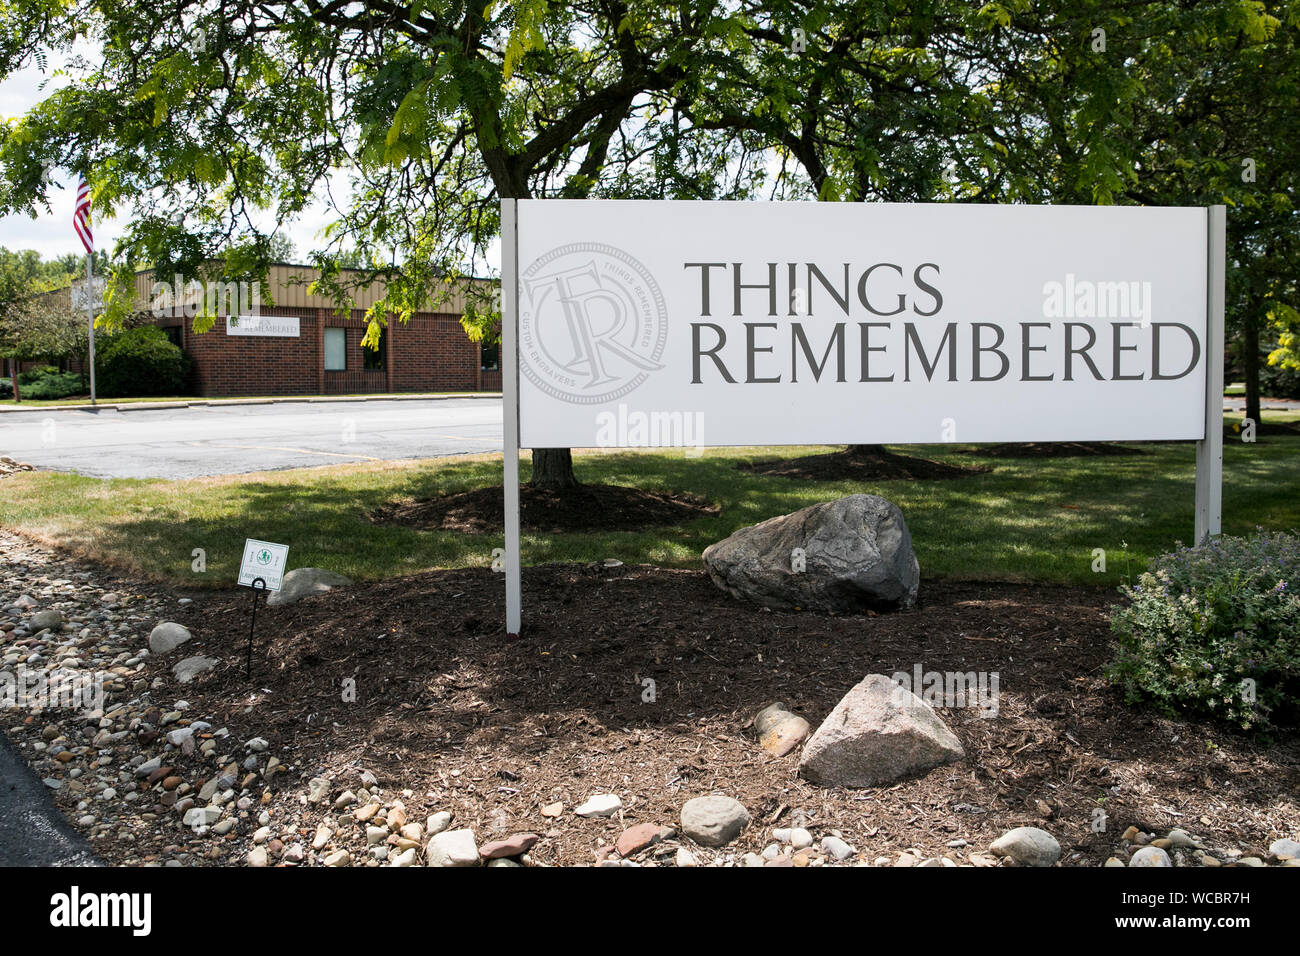 A logo sign outside of the former headquarters of Things Remembered in Highland Heights, Ohio on August 11, 2019. Stock Photo